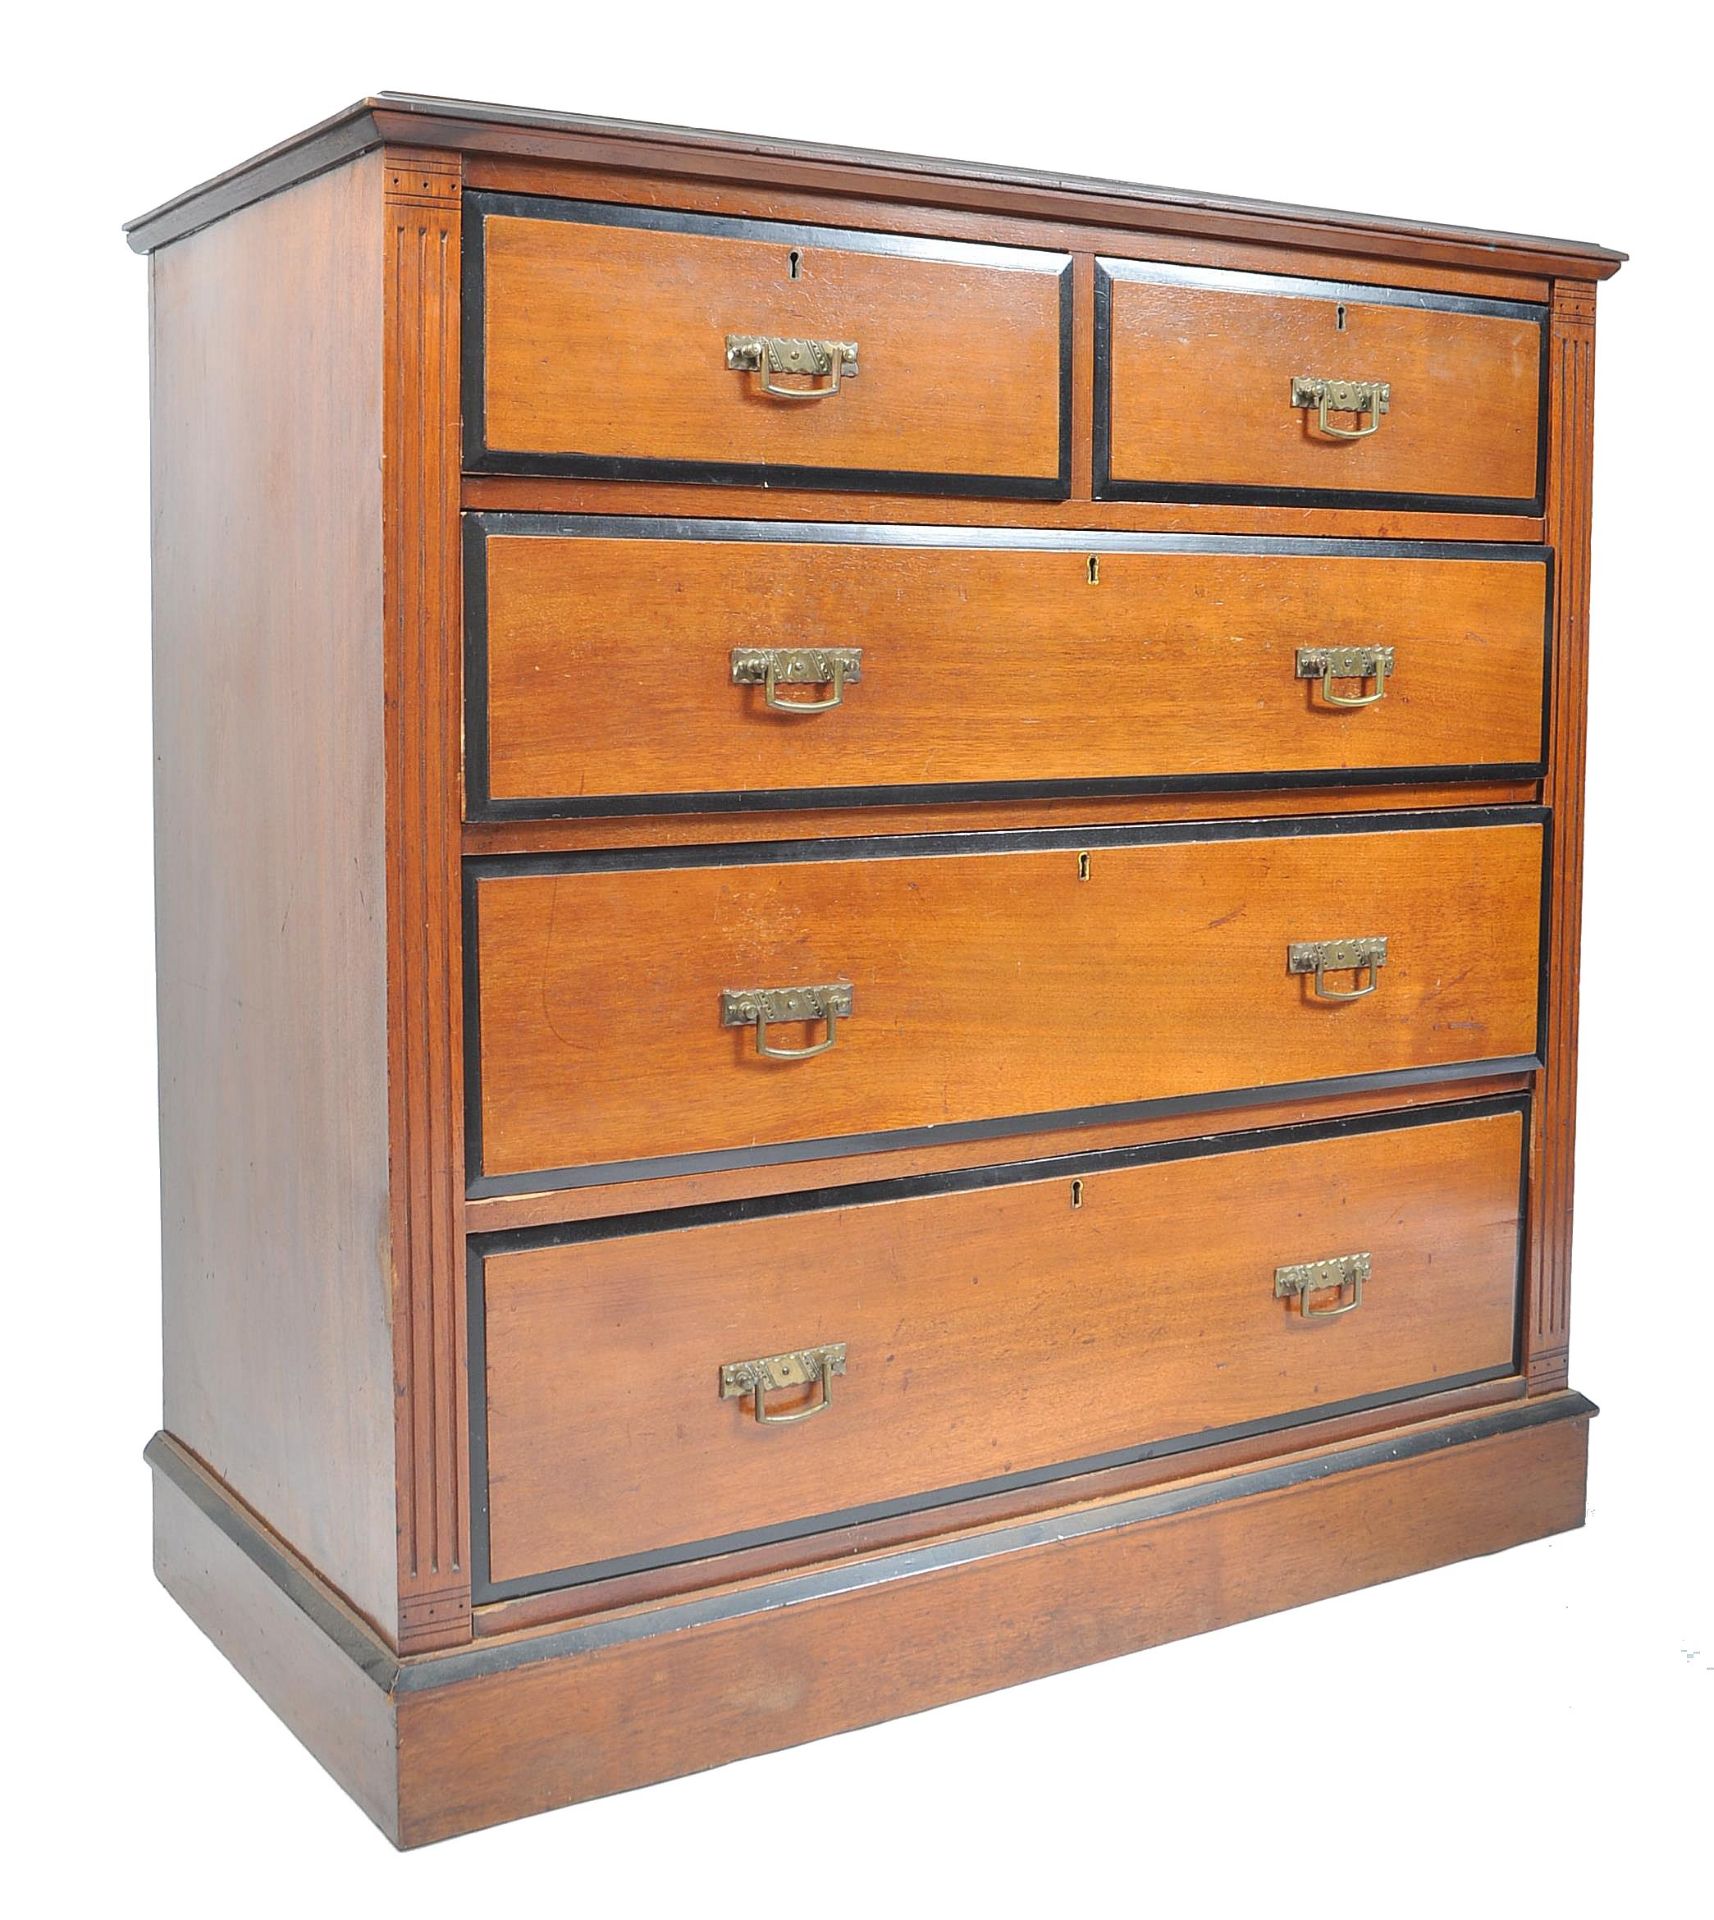 MAPLE & CO LONDON 19TH CENTURY MAHOGANY CHEST OF DRAWERS